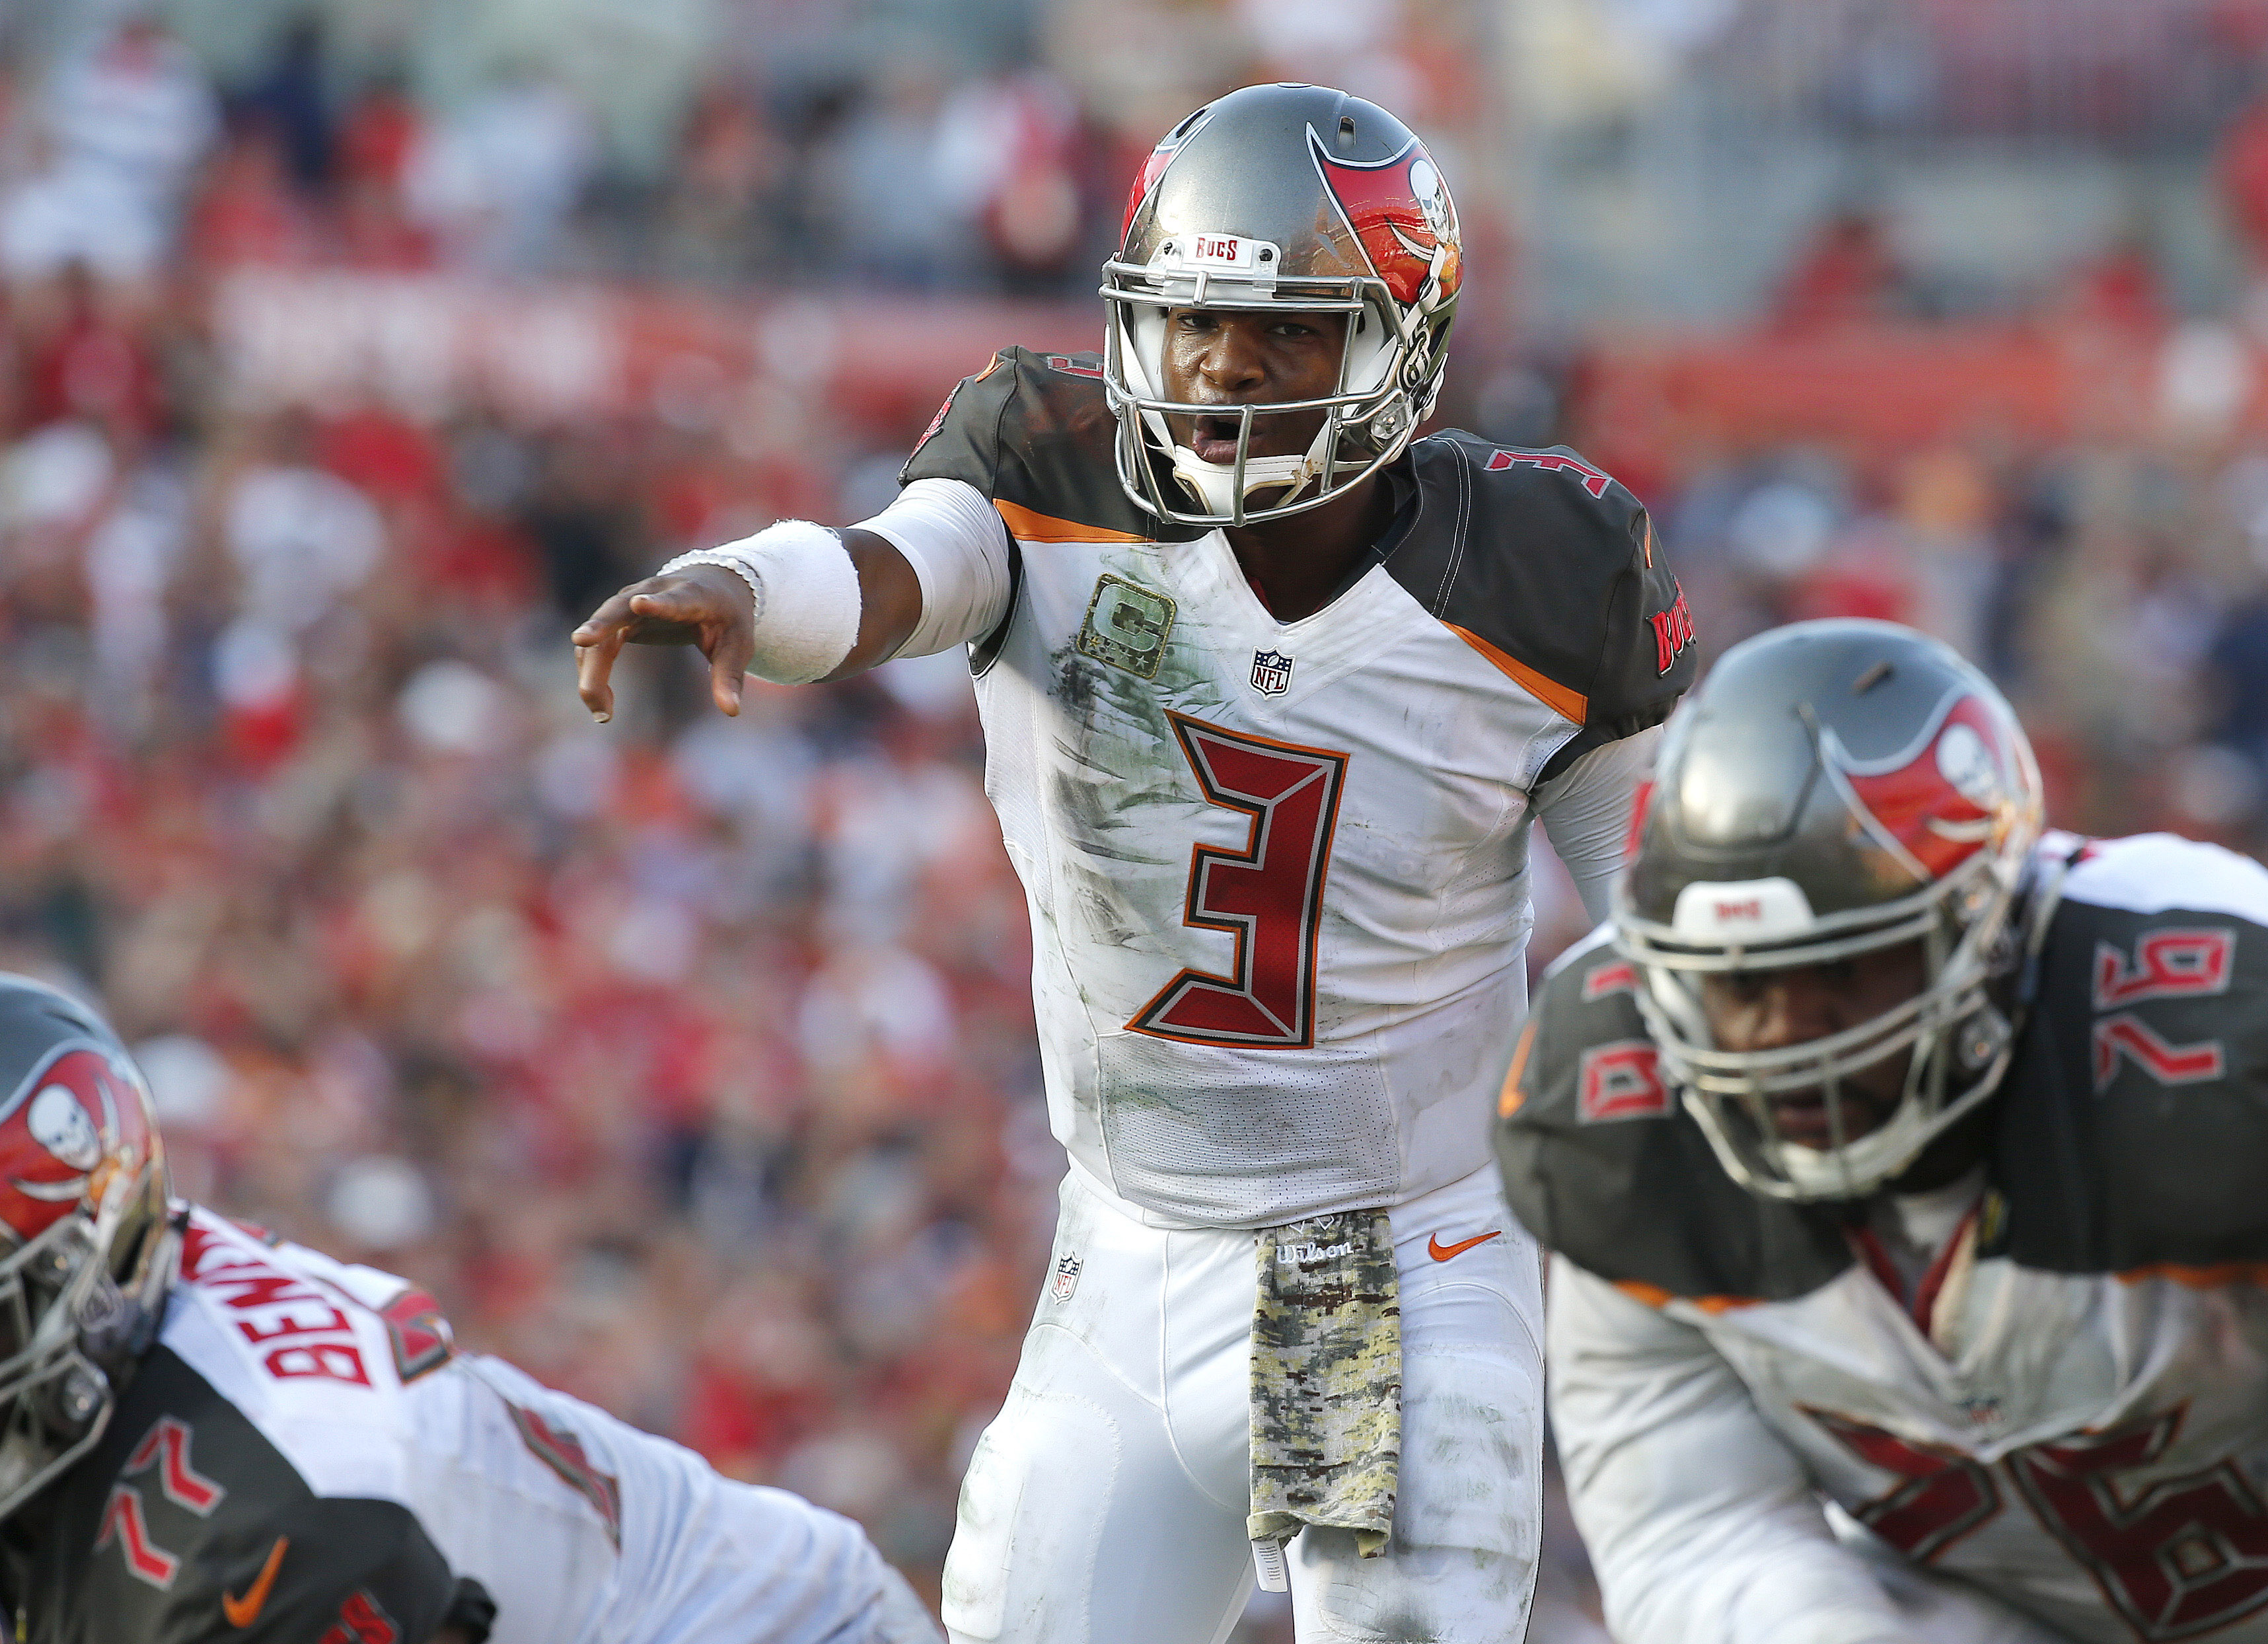 Nov 13, 2016; Tampa, FL, USA; Tampa Bay Buccaneers quarterback Jameis Winston (3) points against the Chicago Bears during the second half at Raymond James Stadium. Tampa Bay Buccaneers defeated the Chicago Bears 36-10. Mandatory Credit: Kim Klement-USA TODAY Sports